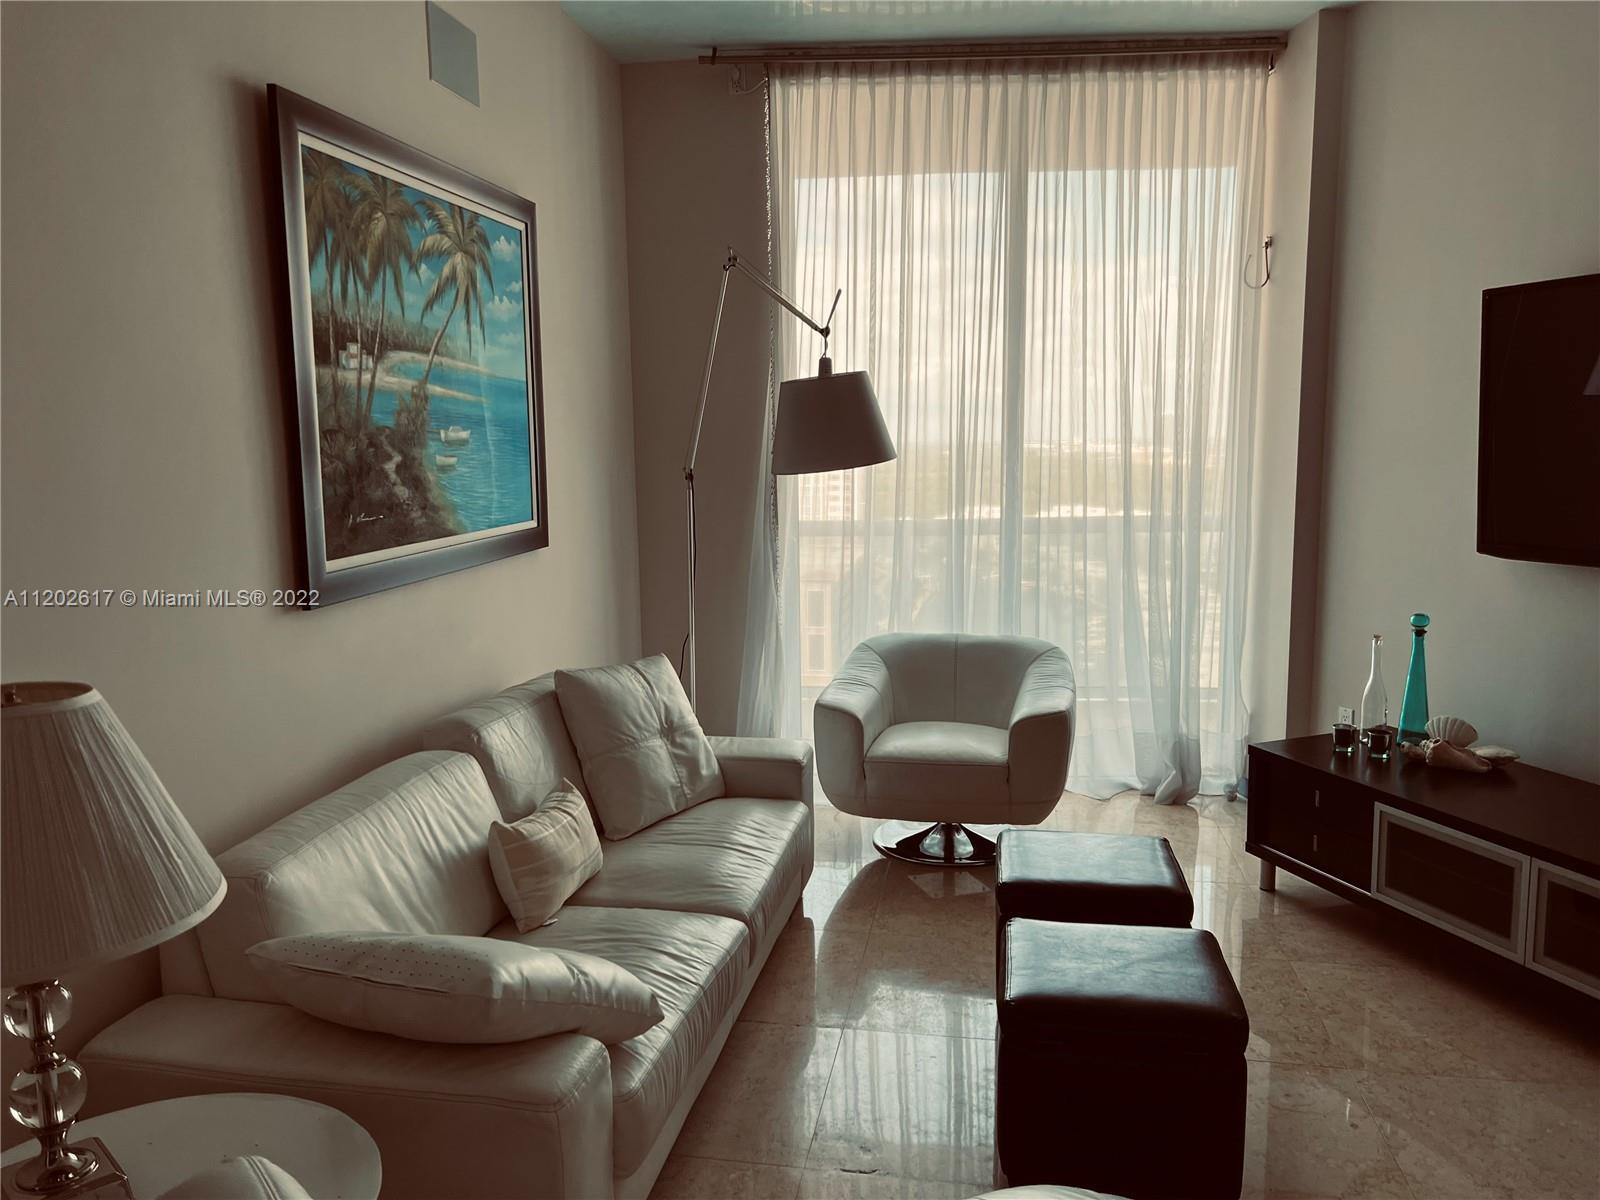 Oceanfront building, 2 bedrooms 2 bathrooms, furnished with large balcony.